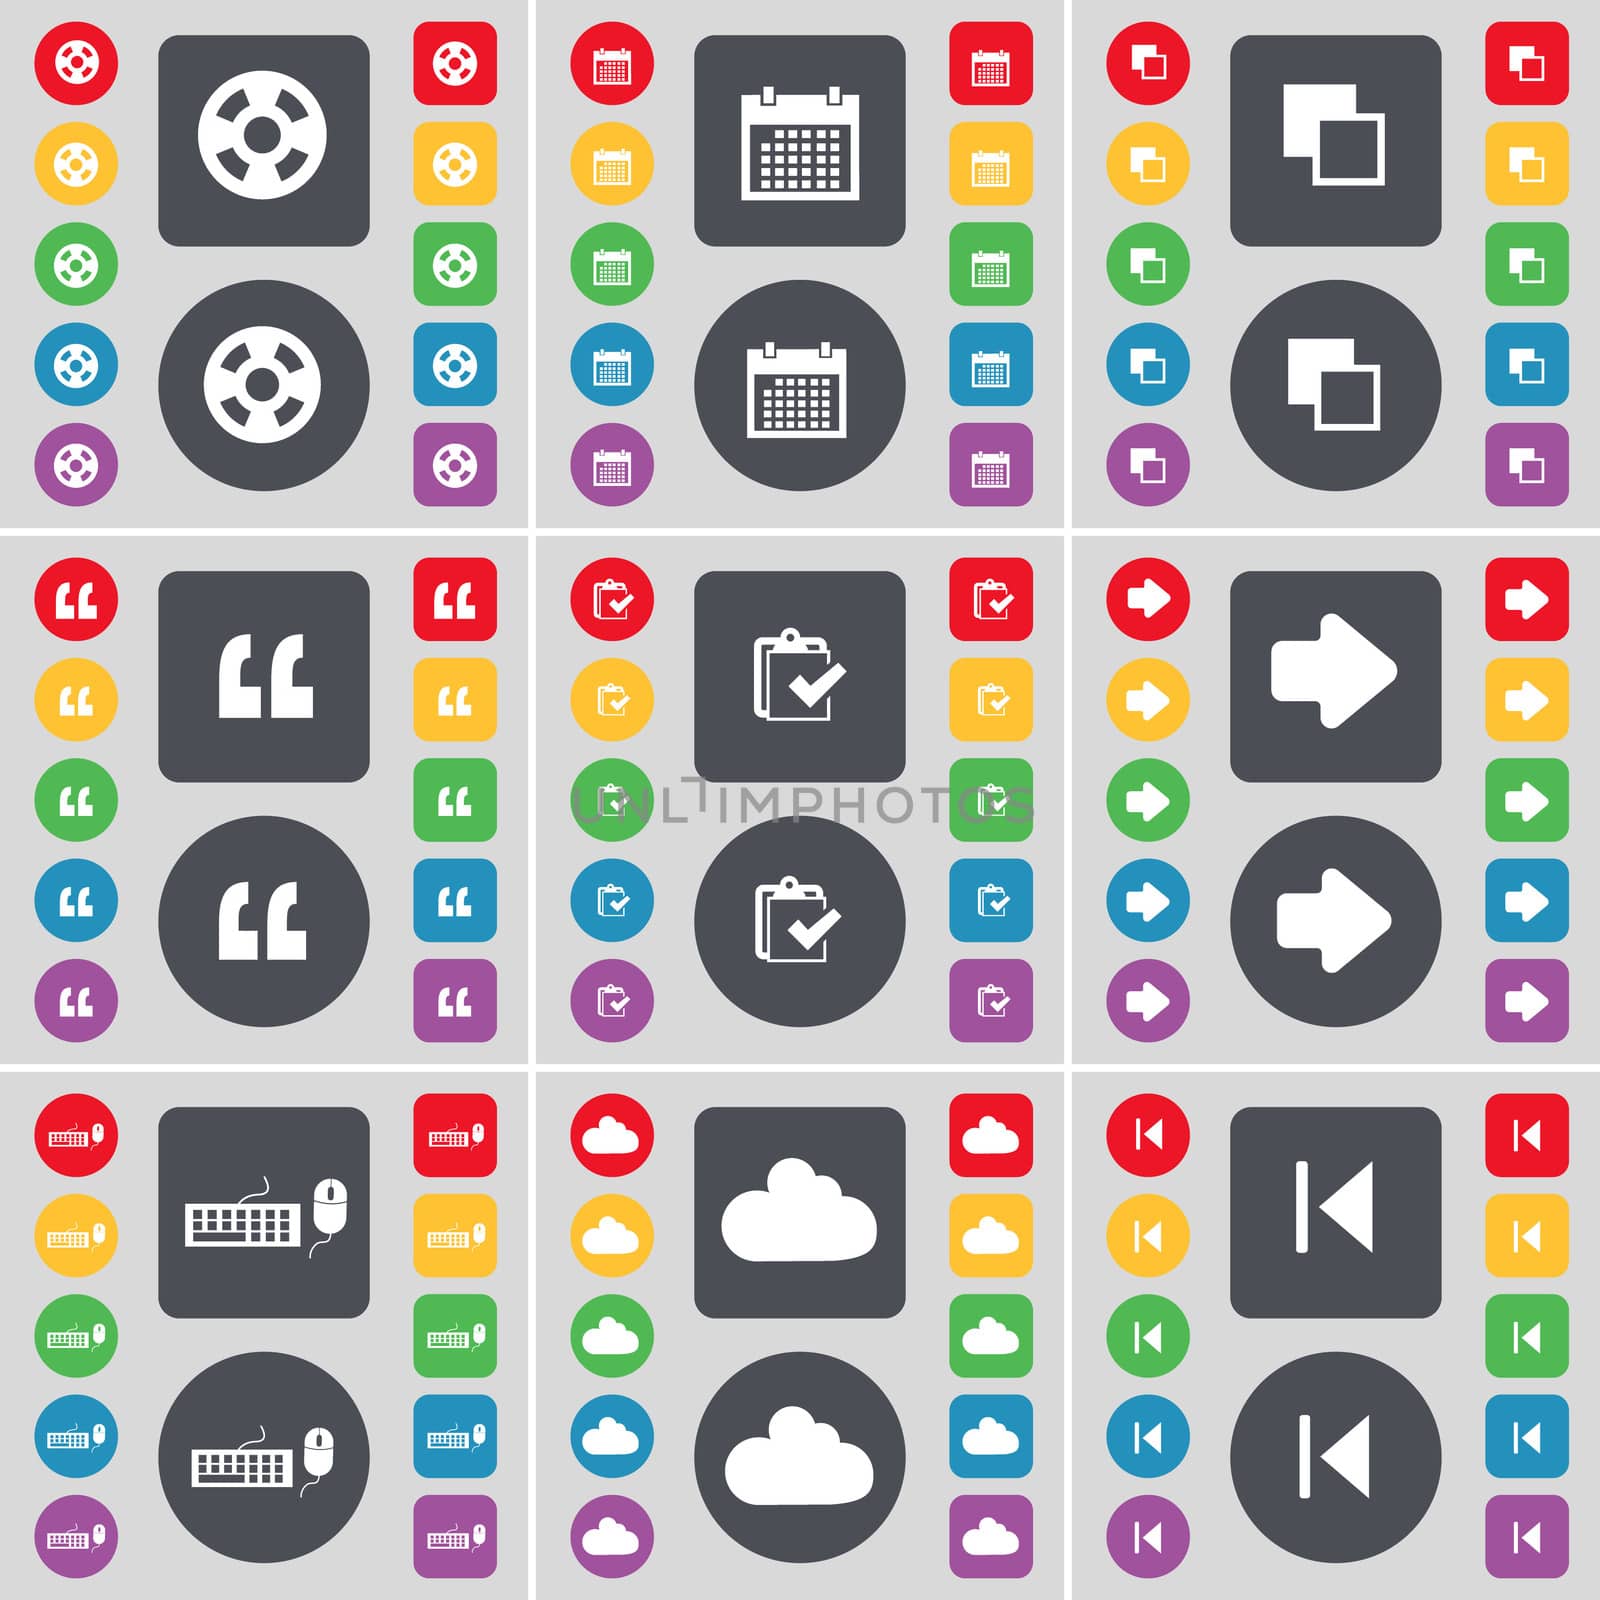 Videotape, Calendar, Copy, Quotation mark, Survey, Arrow right, Keyboard, Cloud, Media skip icon symbol. A large set of flat, colored buttons for your design. illustration